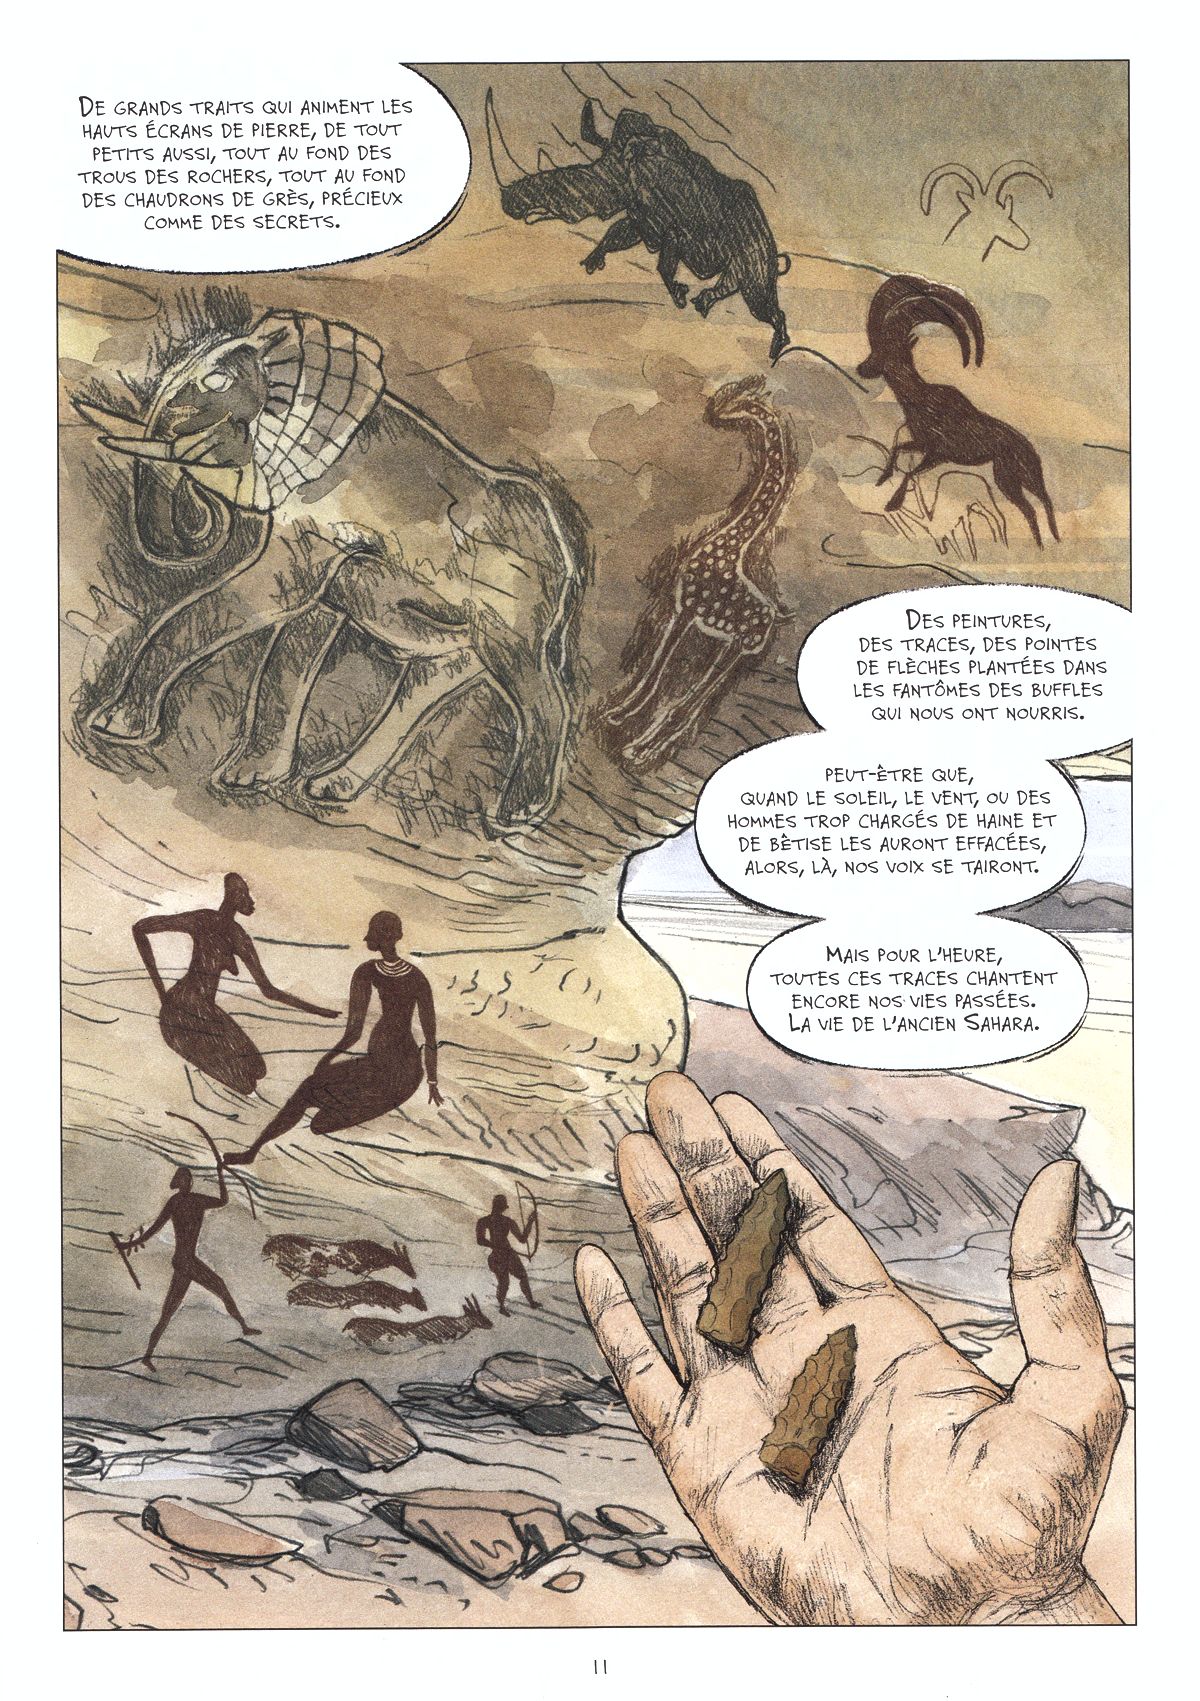 Page from the comic book « Tassili, une femme libre au Néolithique » by Maadiar and Fréwé, stressing the importance of preserving the rock art of Tassili n’Ajjer, stunning evidence of the life of the first pastoralist groups in the central Sahara.